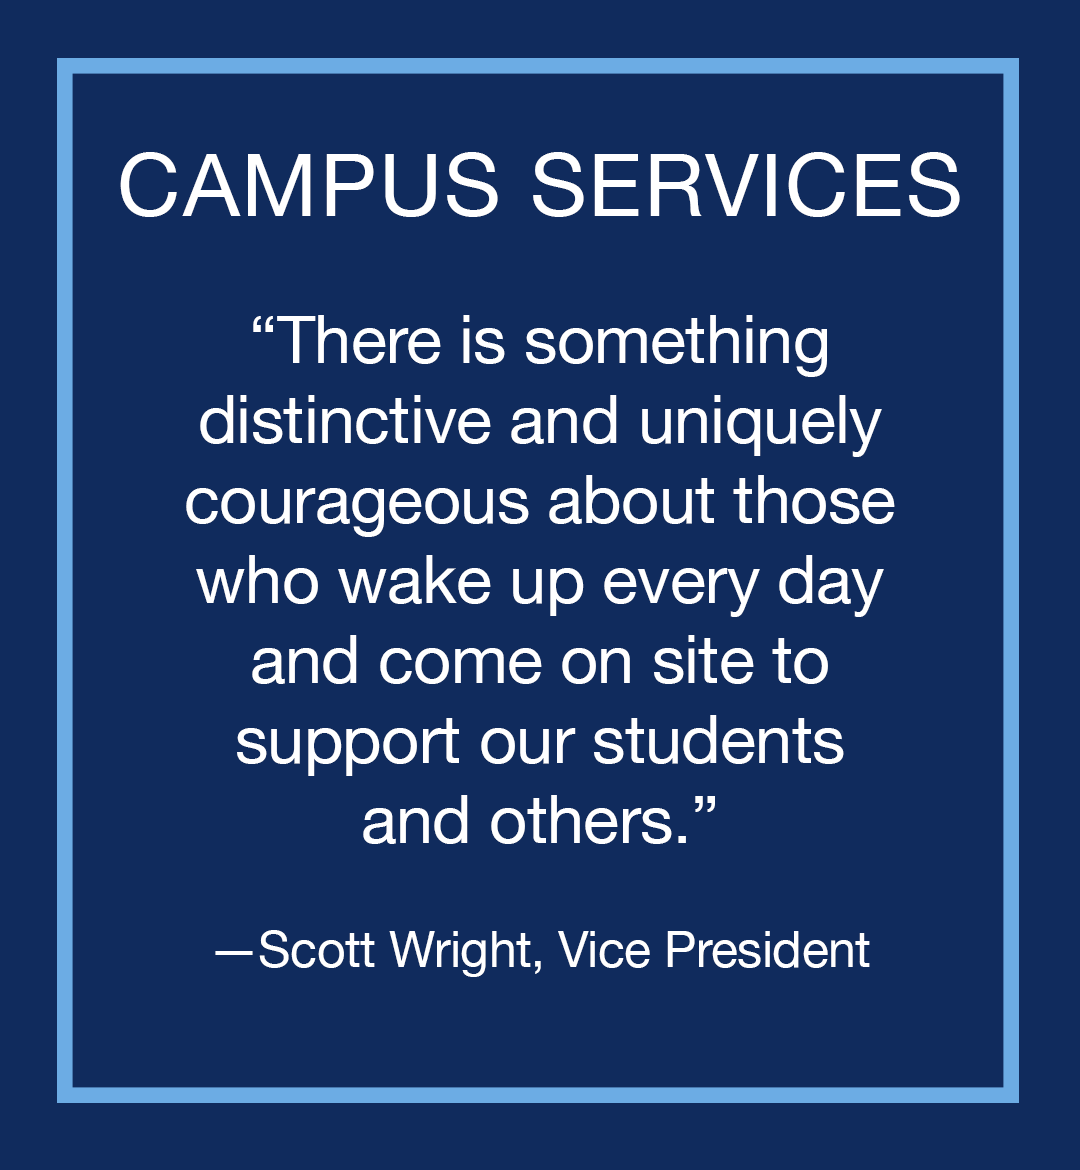 Image with text: Campus Services, "There is something distinctive and uniquely courageous about those who wake up everyday and come on site to support our students and others," Scott Wright, Vice President